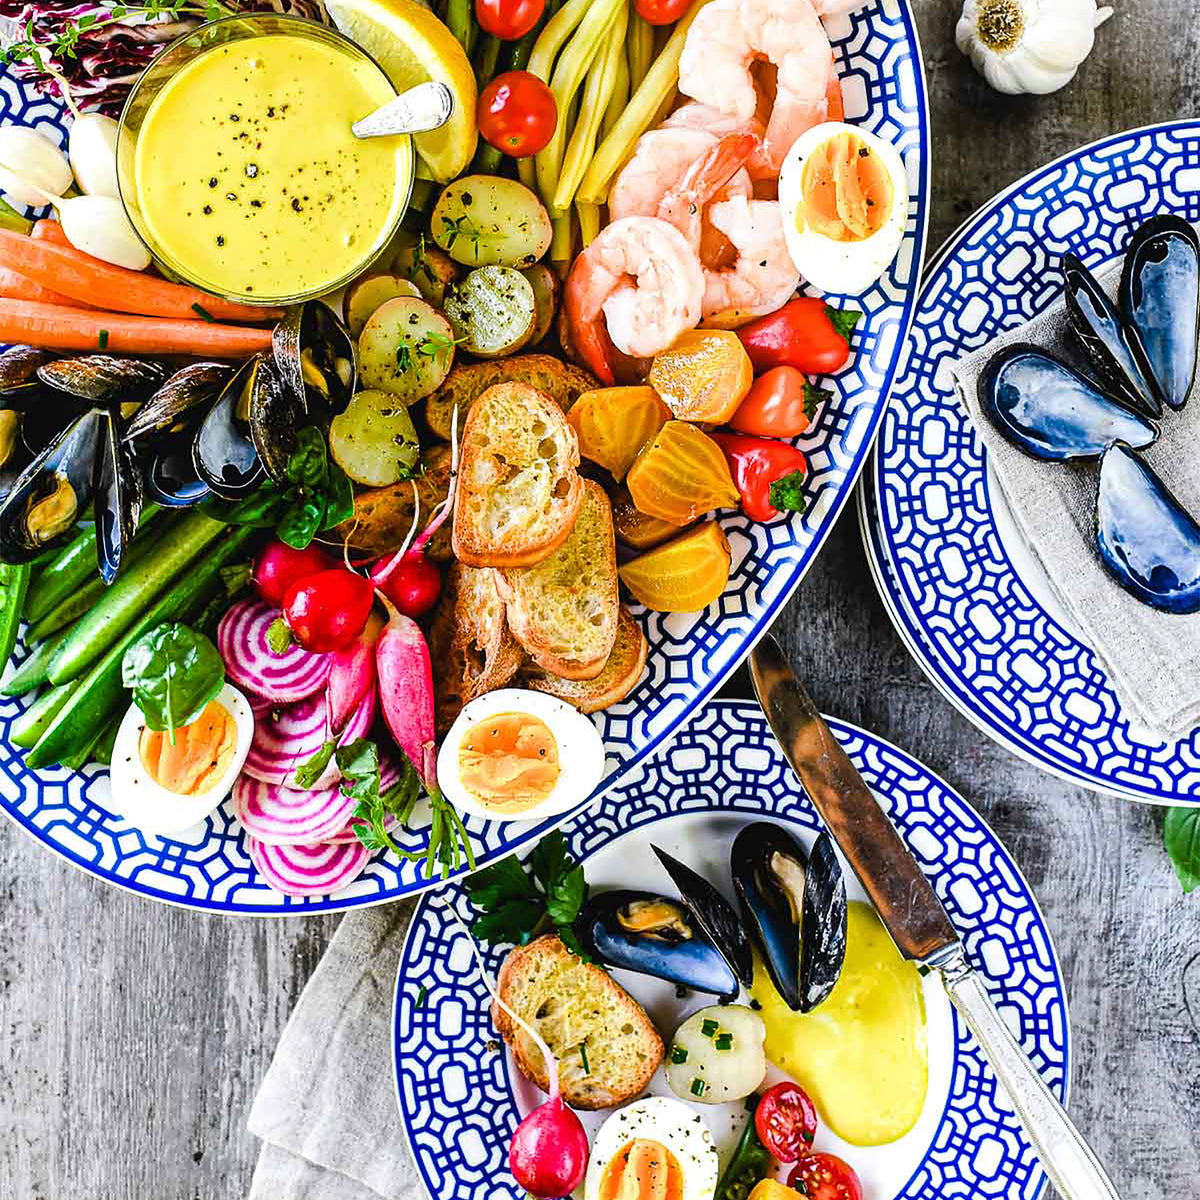 A colorful seafood platter with shrimp, mussels, boiled eggs, vegetables, toasted bread, and a bowl of yellow dipping sauce, served on Newport Garden Gate Rimmed Salad Plates from Caskata Artisanal Home.